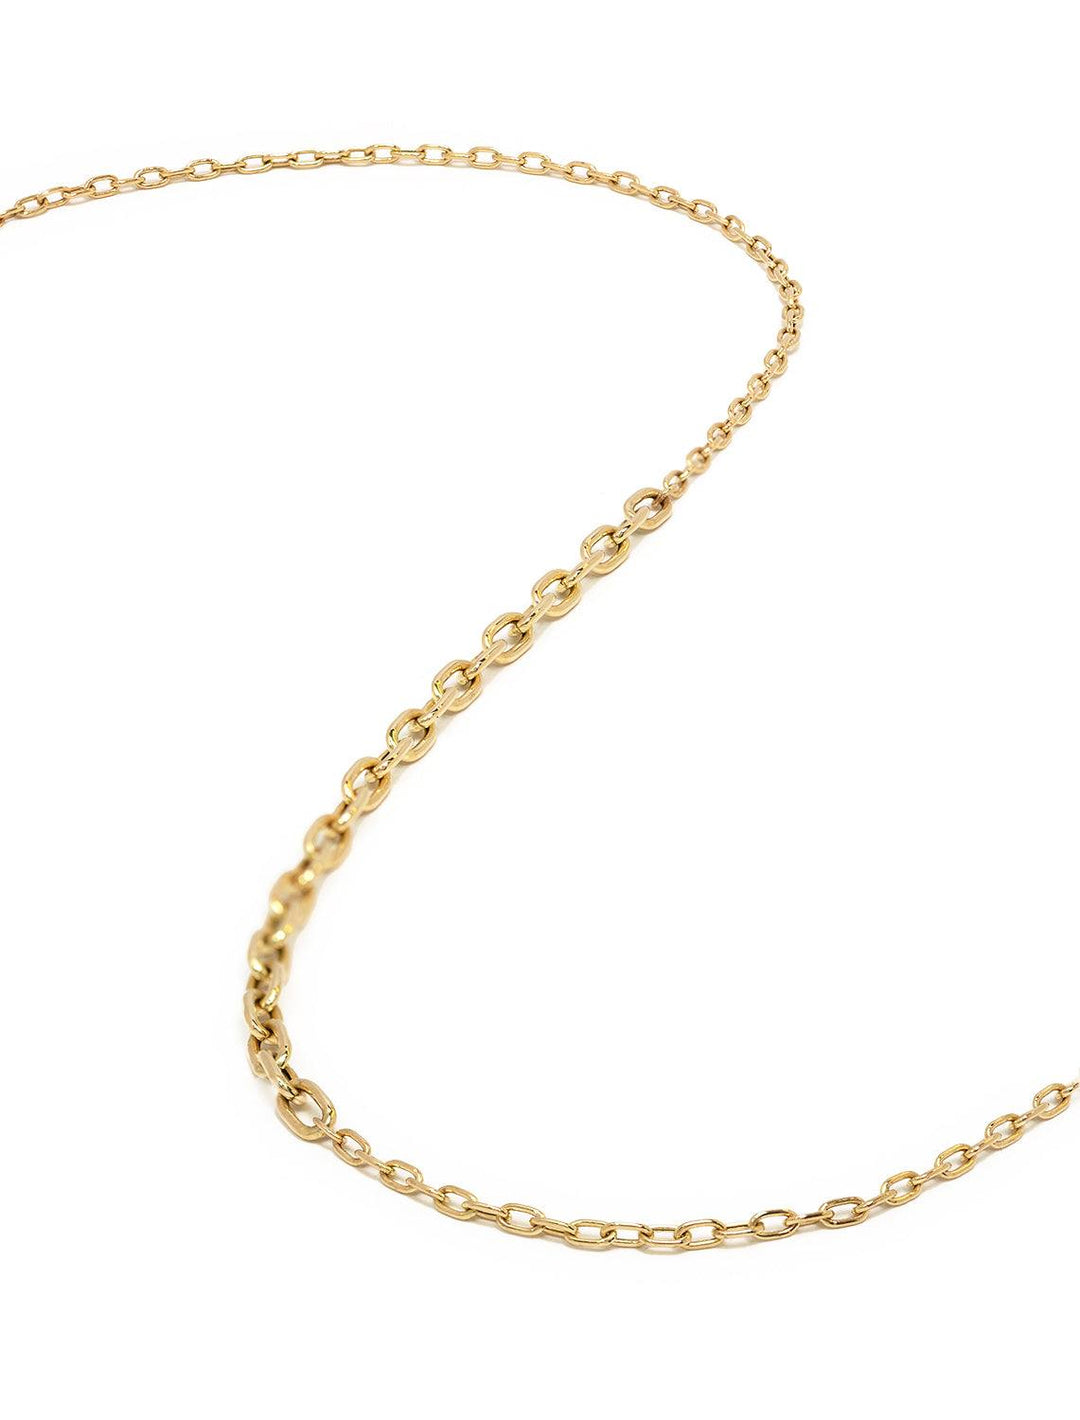 Stylized laydown of Zoe Chicco's 14k mixed small and medium link chain station necklace | 18".